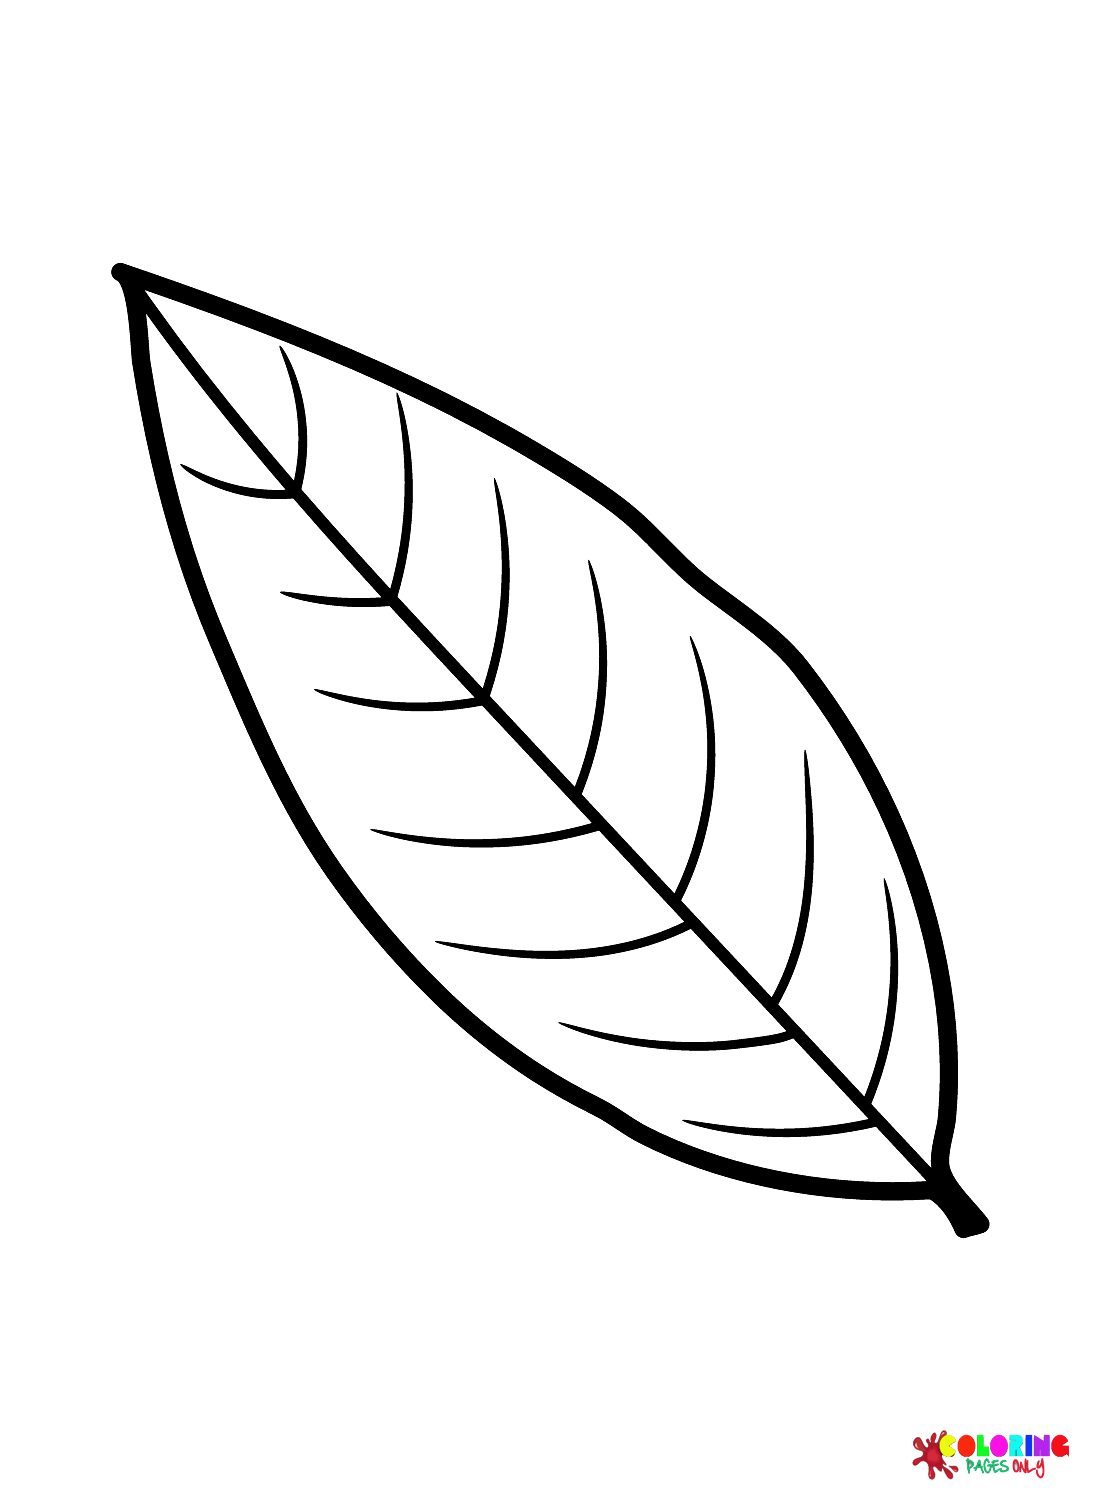 Leaves coloring pages printable for free download